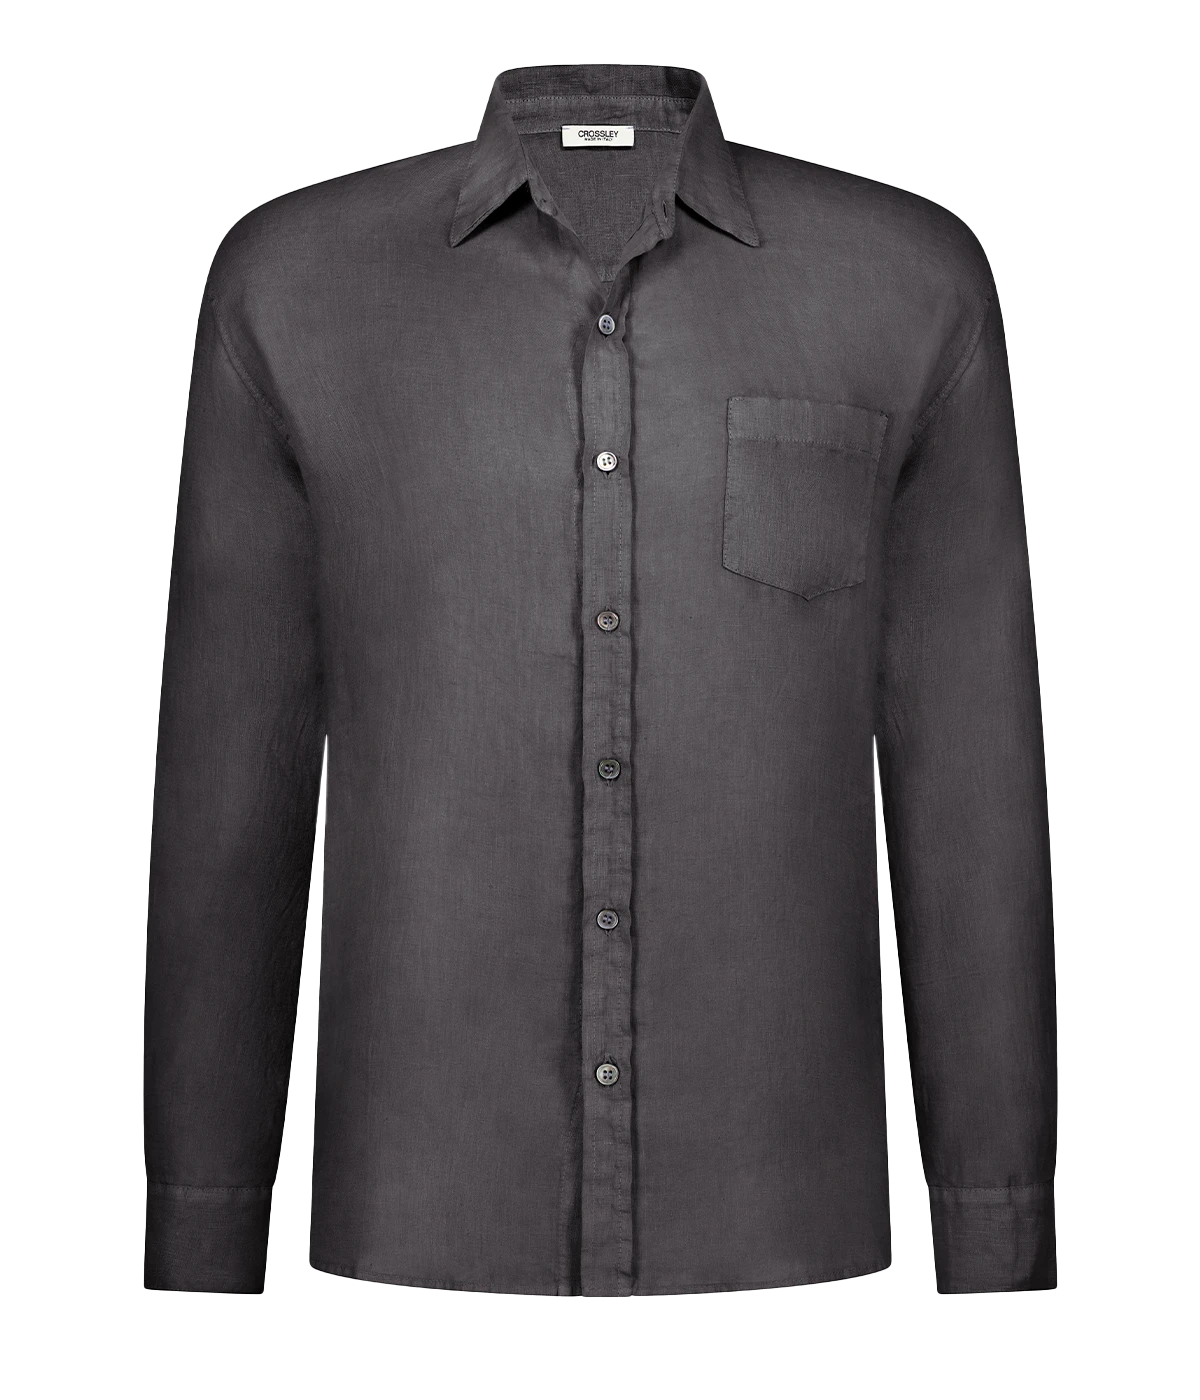 A summer staple long sleeve 100% linen shirt in a washed black, button up & collar detailing featuring a front pocket. Made in Italy, 100% linen, throw on and go. 